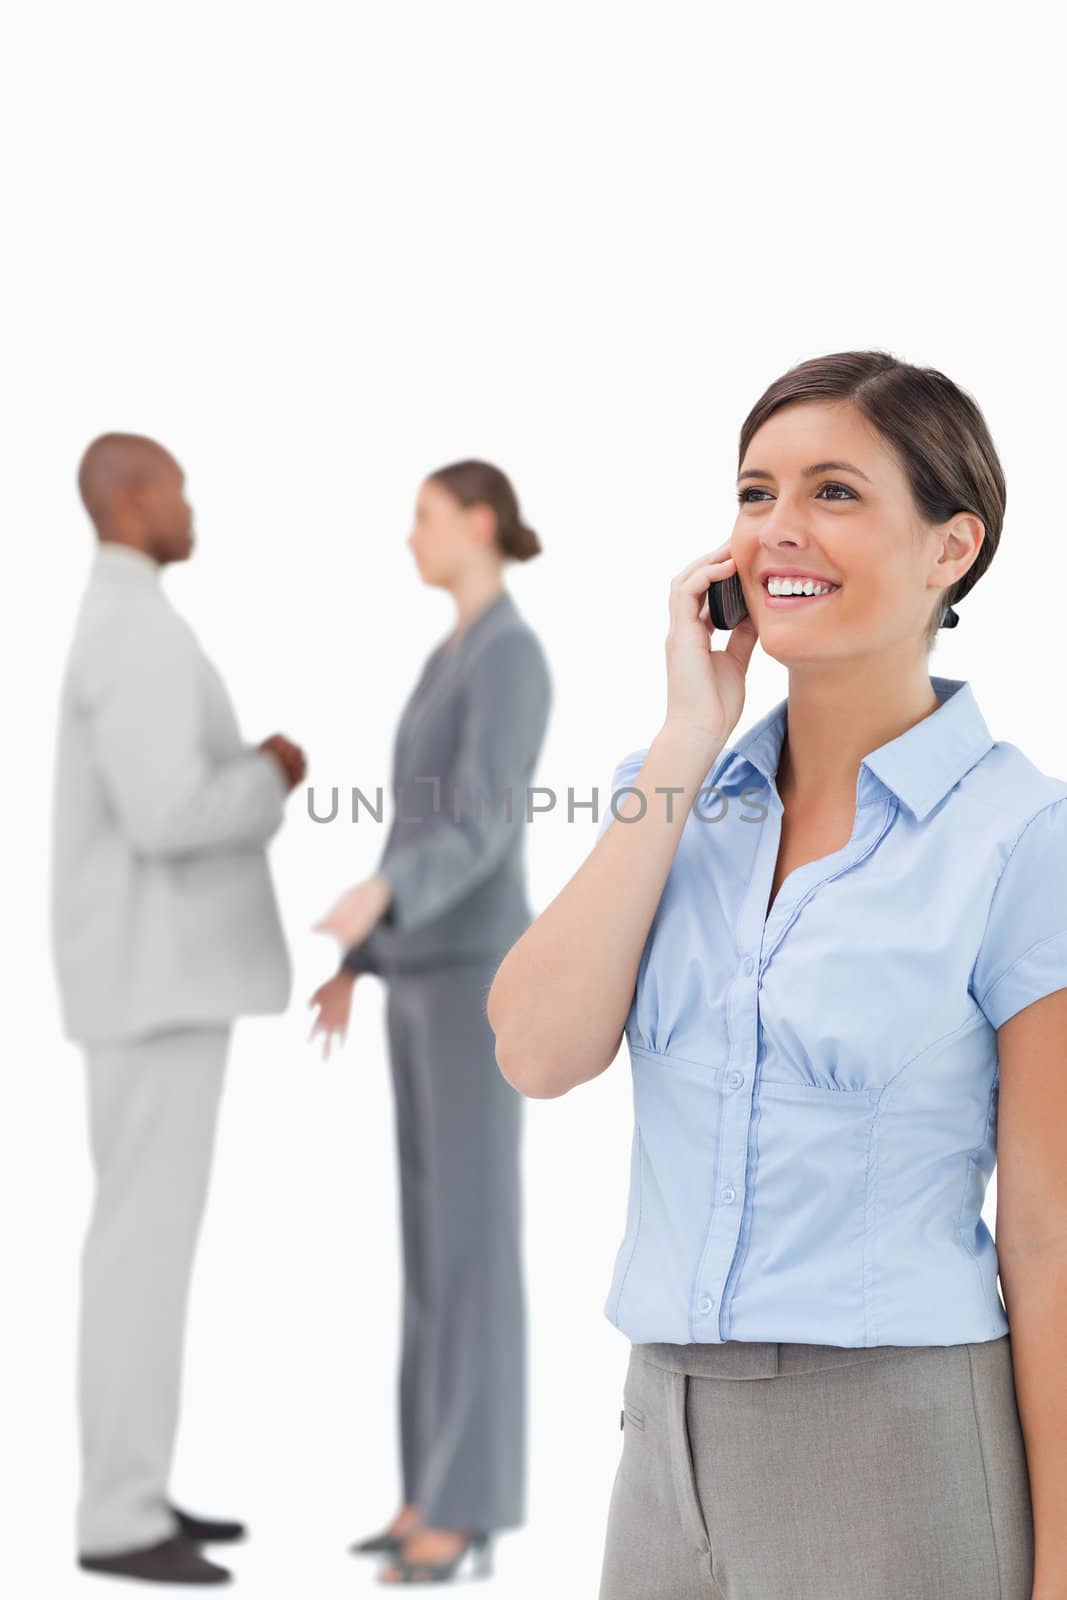 Smiling saleswoman on the phone with colleagues behind her against a white background